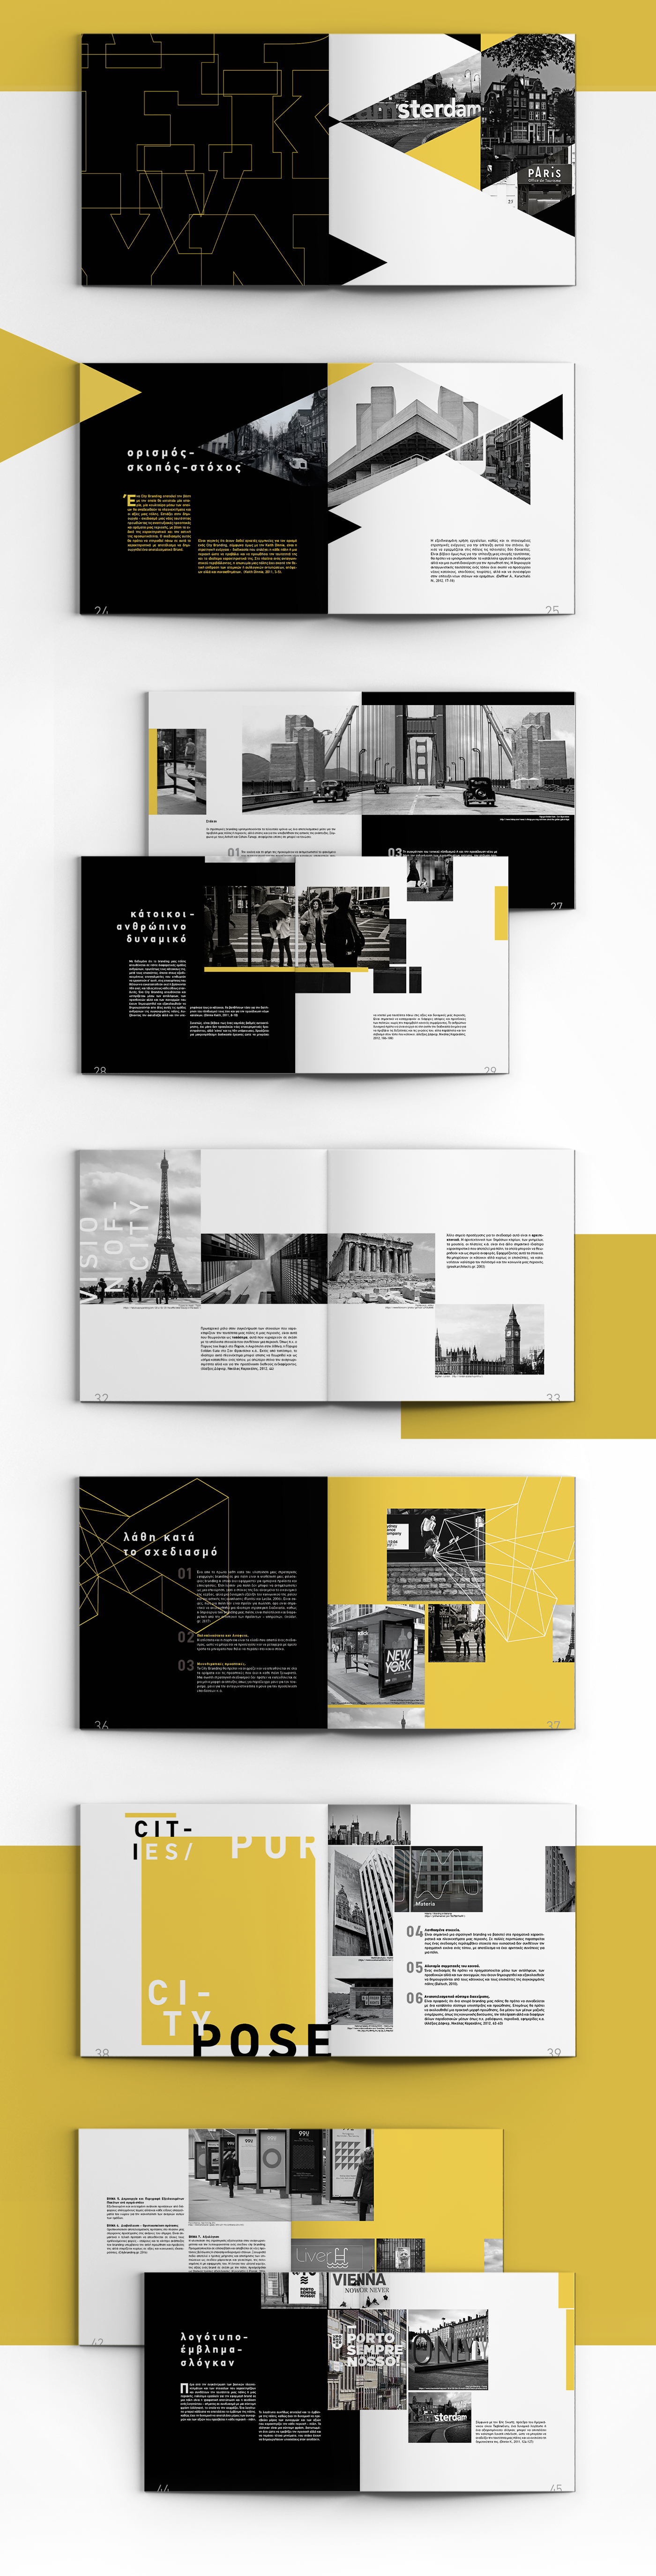 book design book Layout City branding graphic design  typesetting template magazine cover editorial